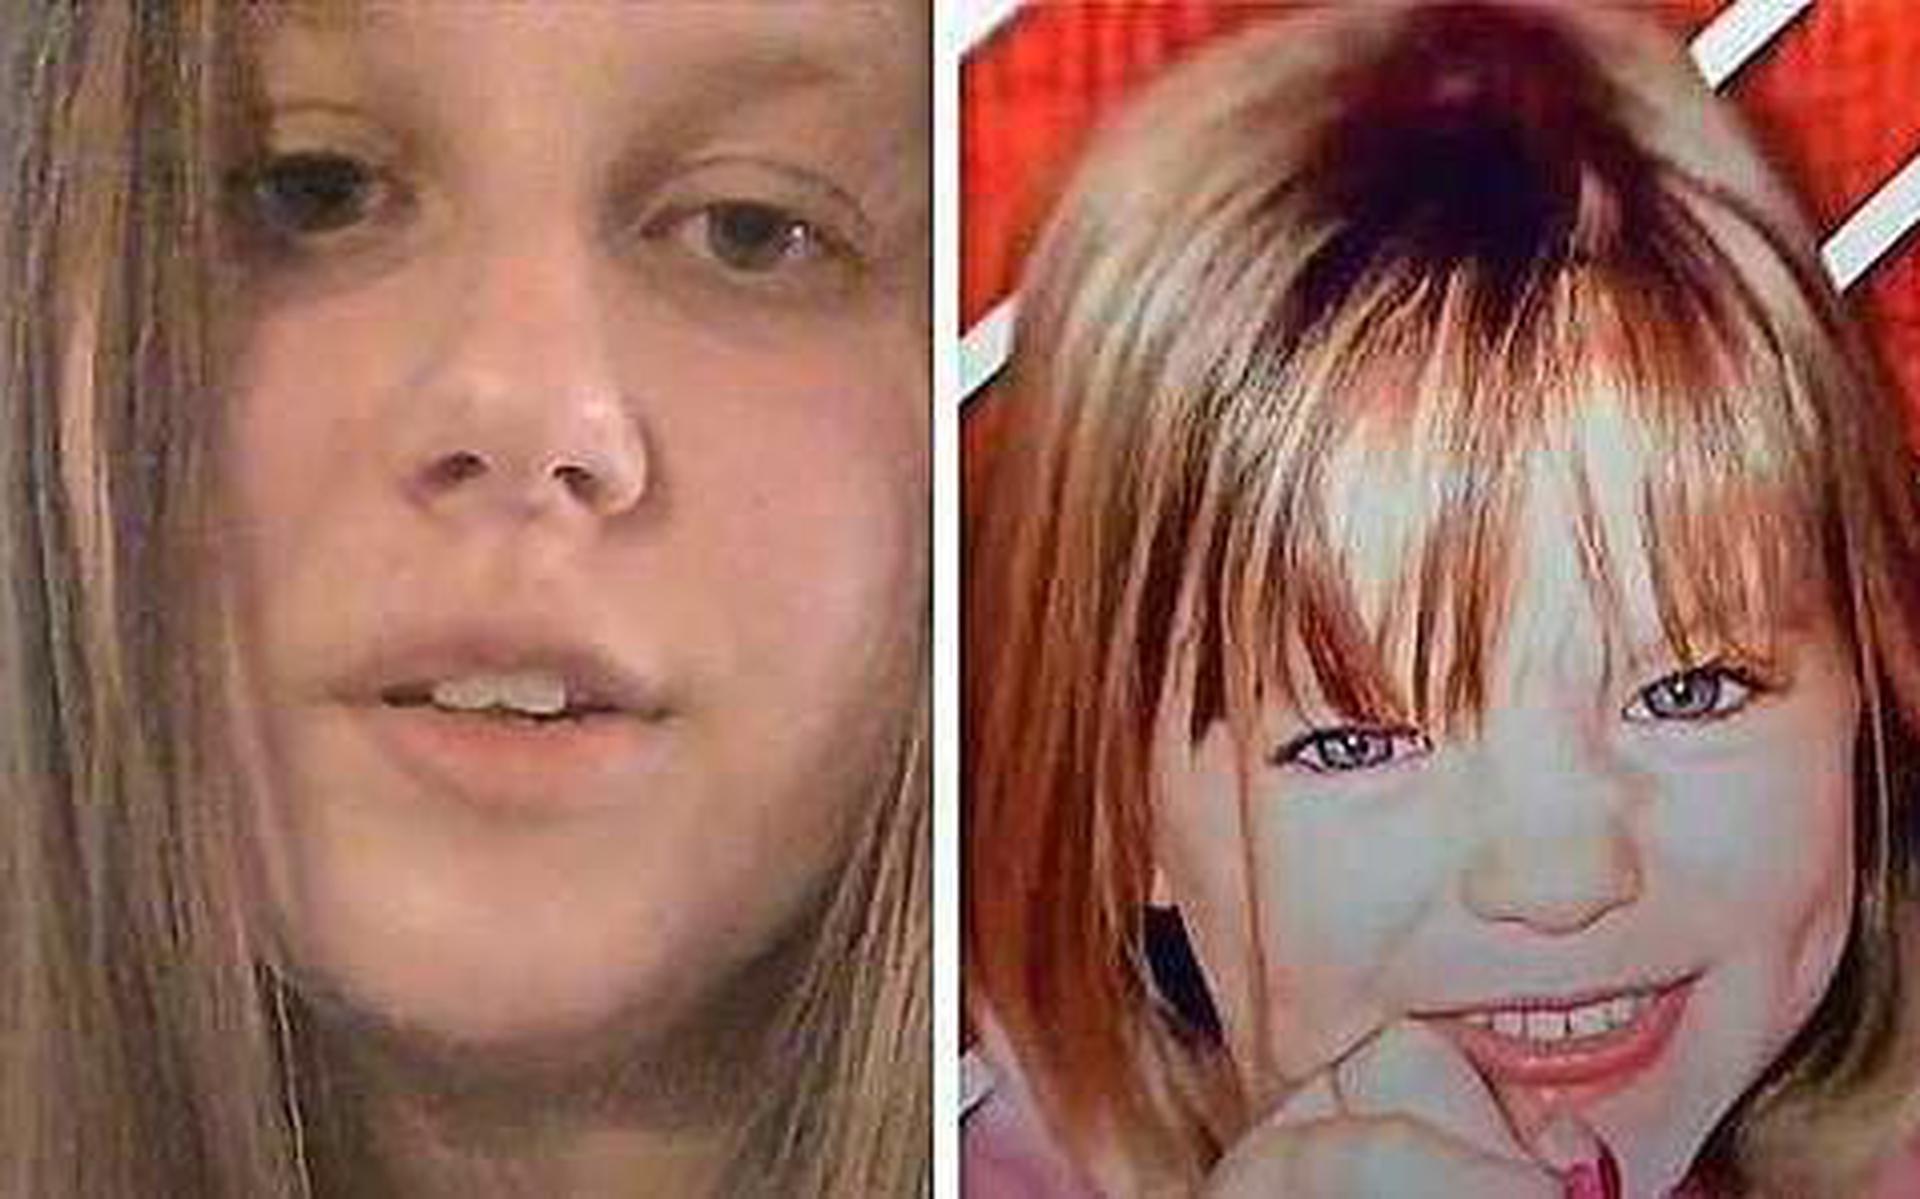 The Polish woman (21) isn’t Madeleine McCann after all.  “We are devastated”